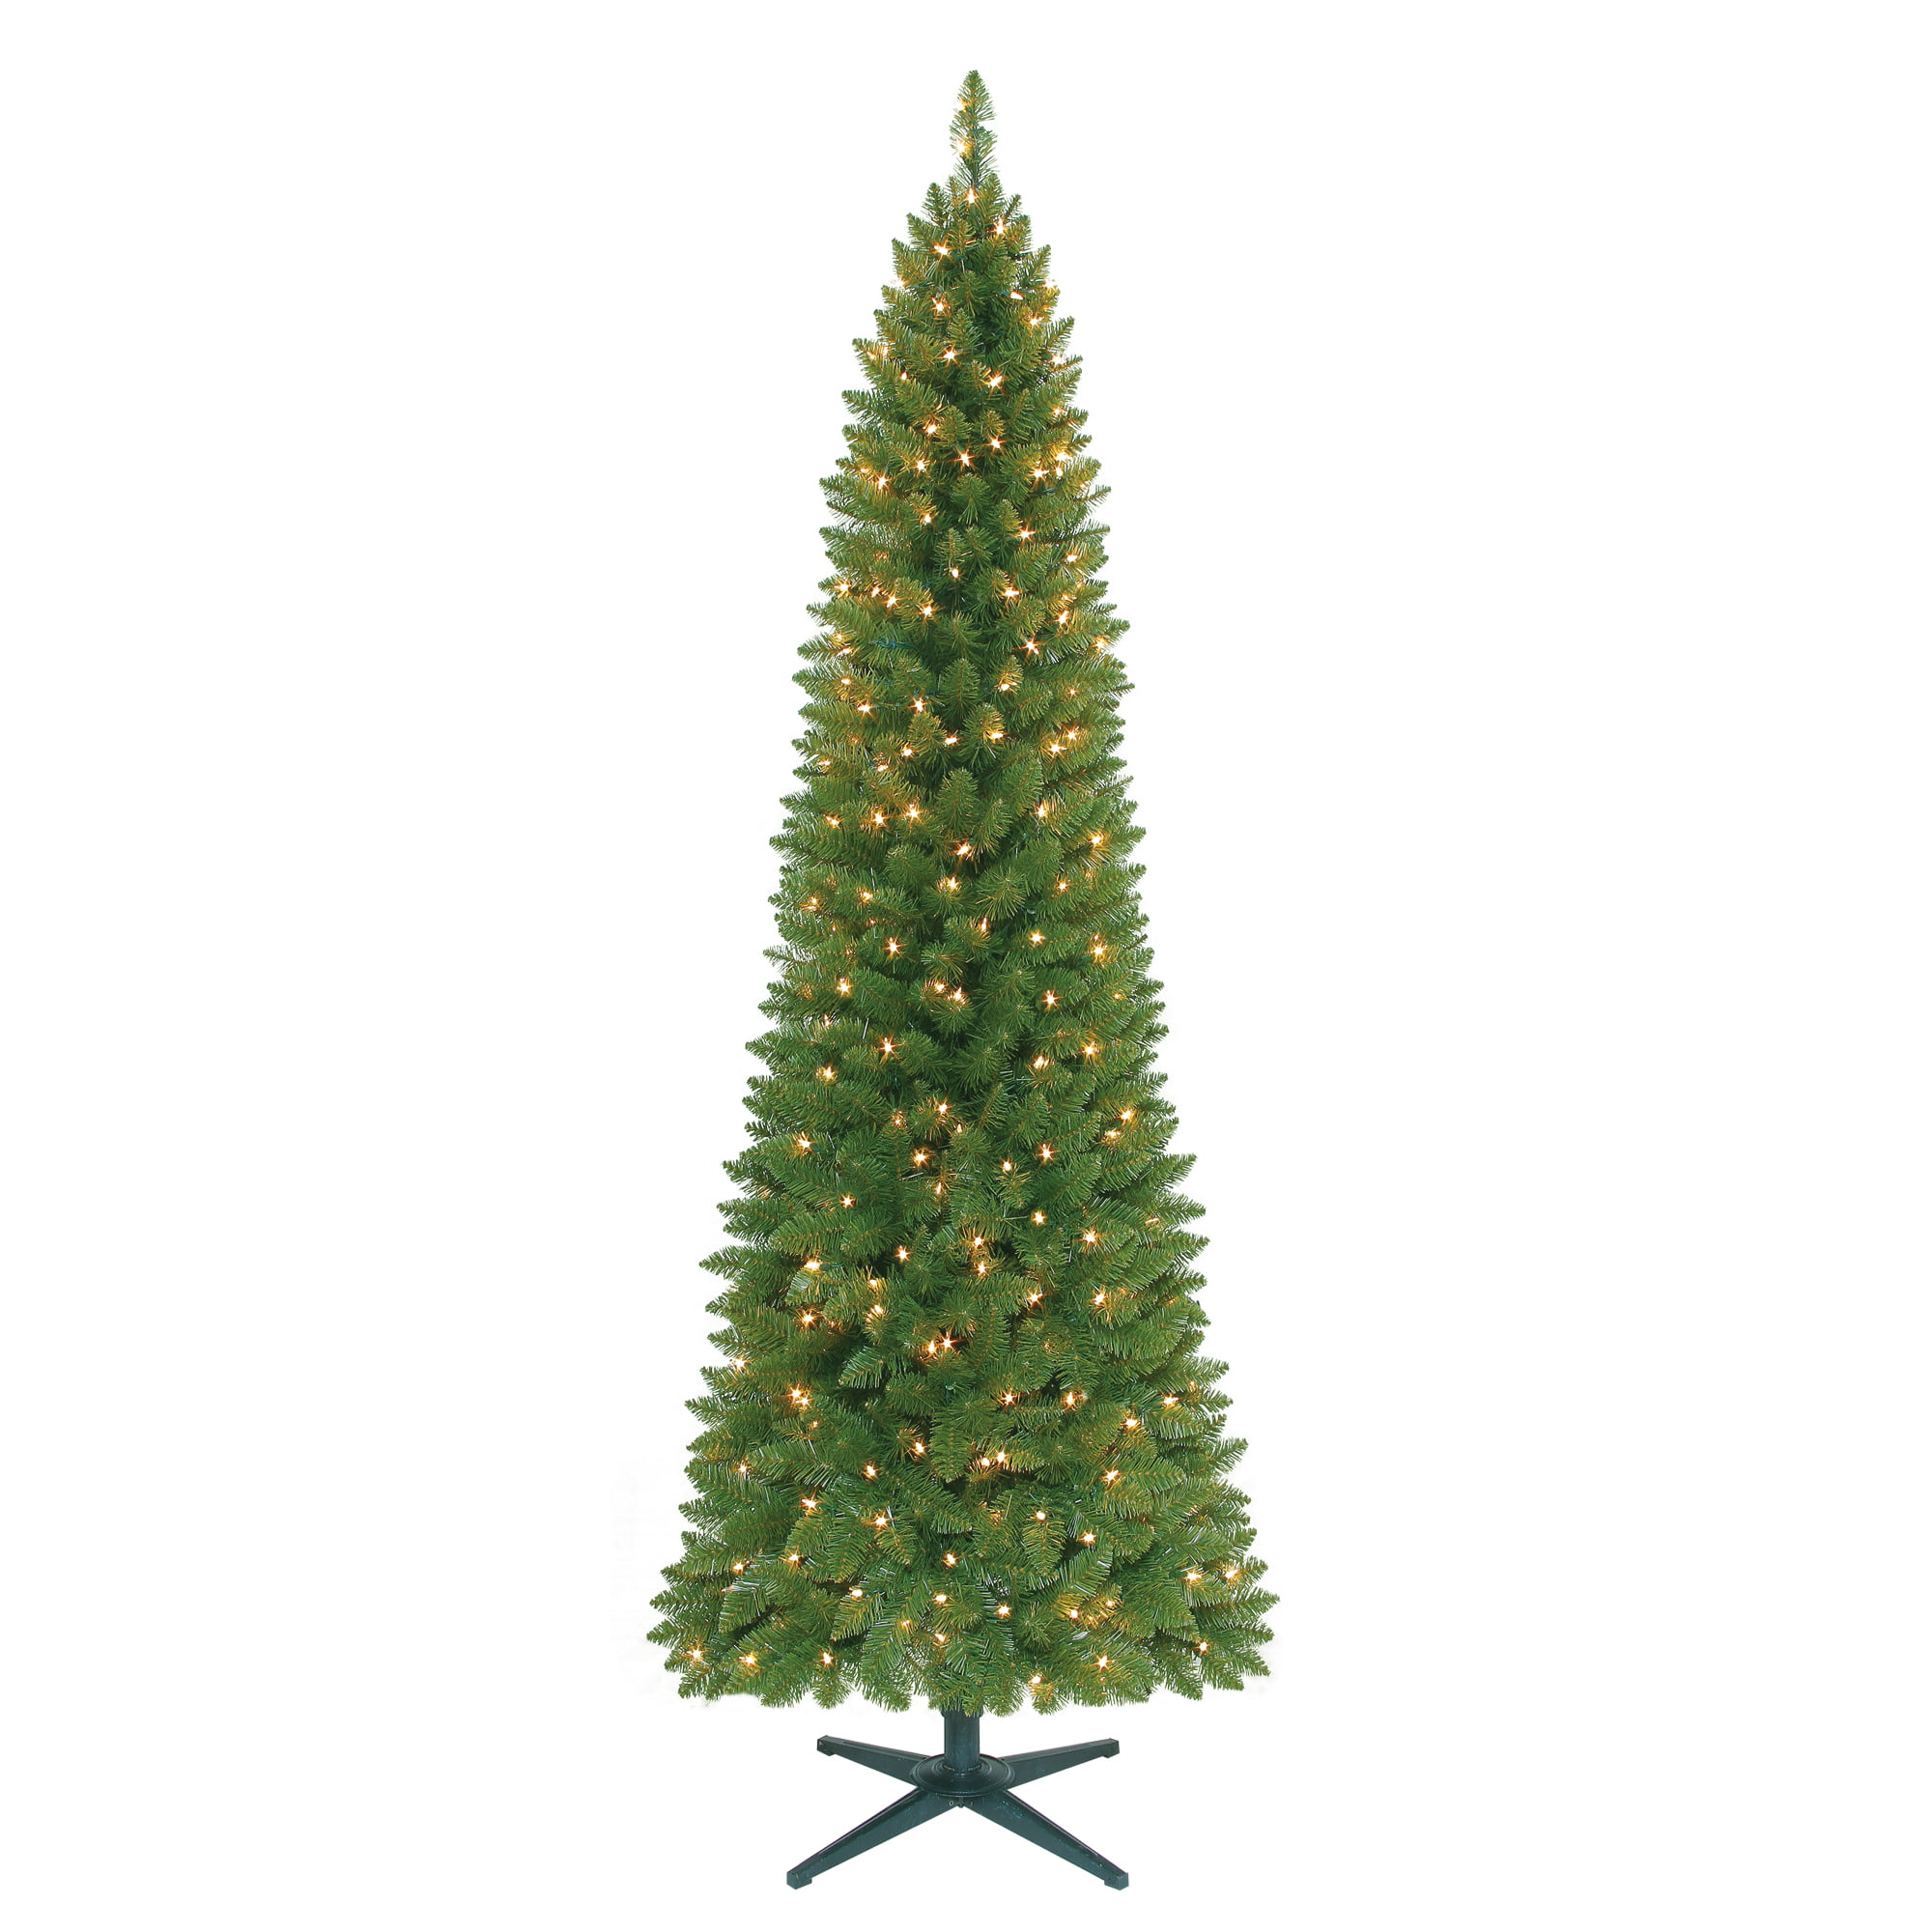 6FT Pre-lit Green Pine Christmas Tree with 250 Clear Lights PVC and Stand New